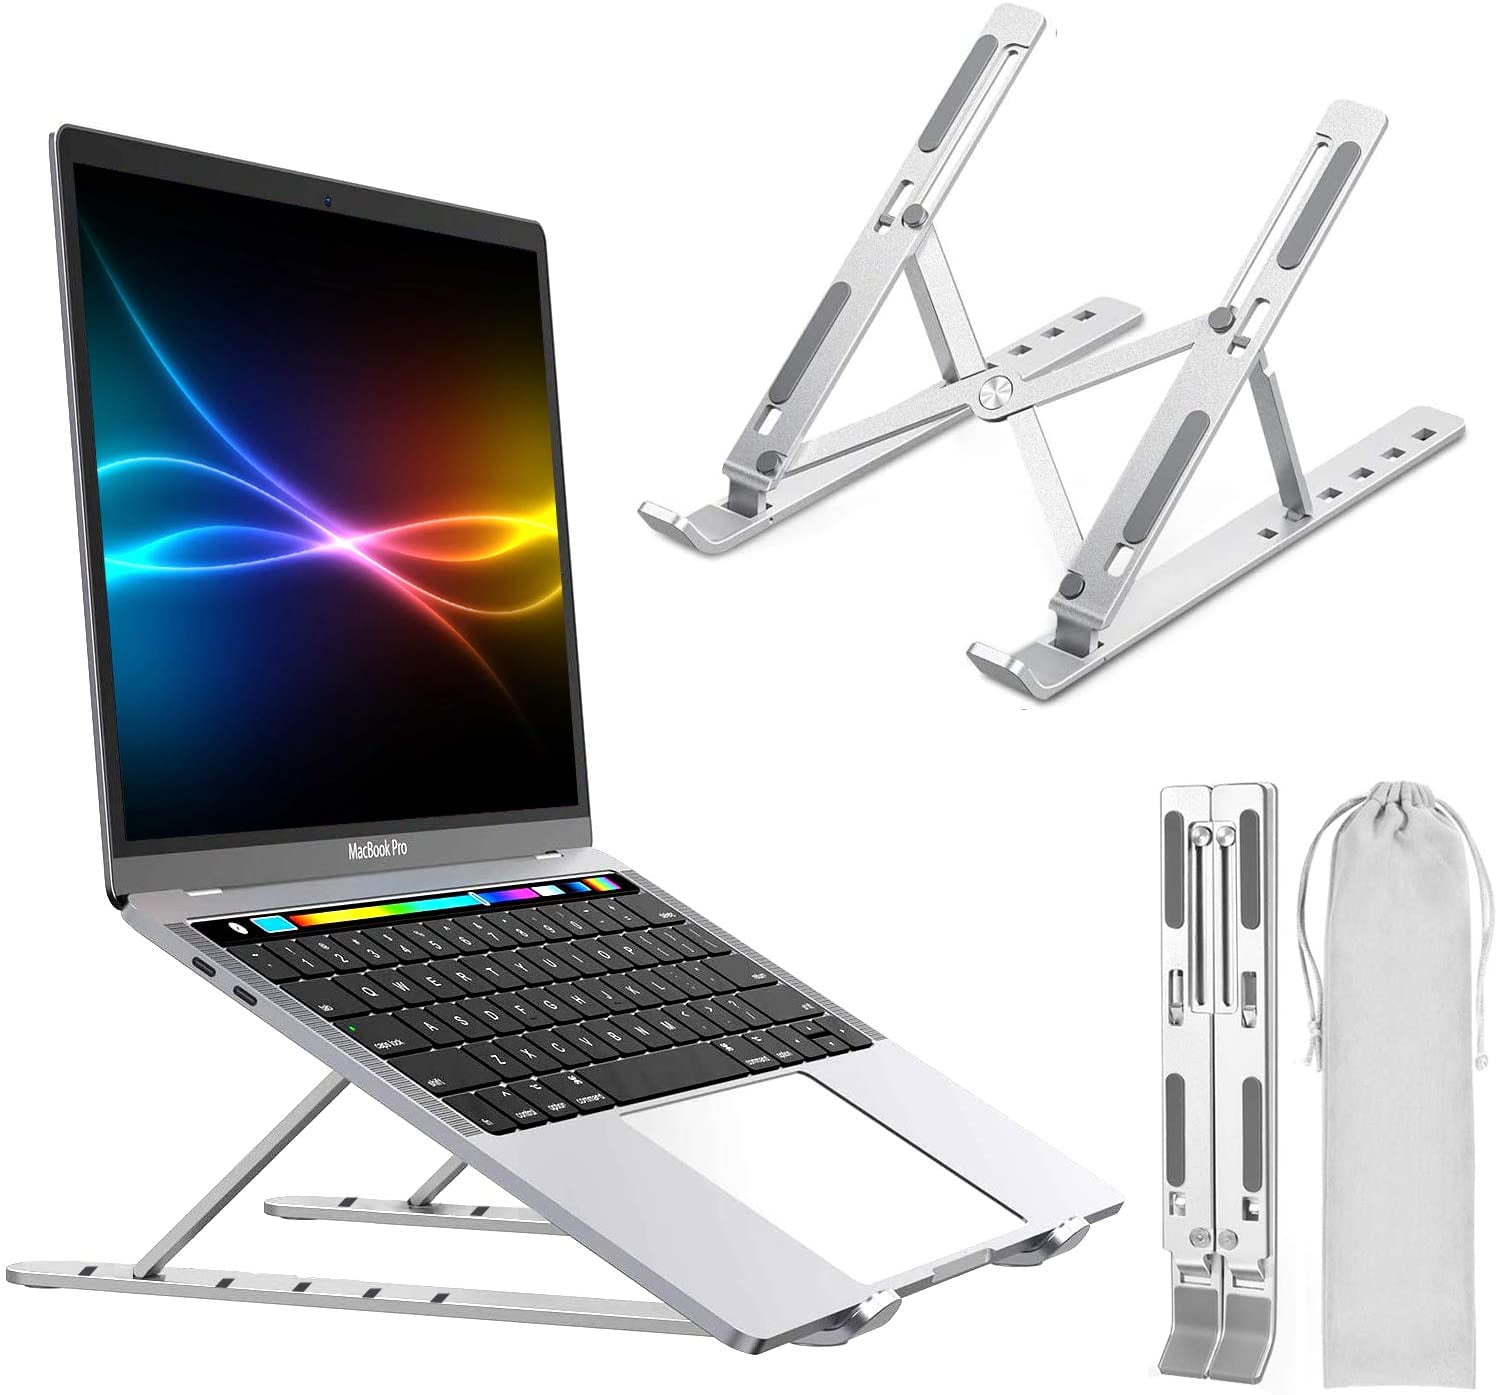 Silver Laptop Stand Adjustable Aluminum Foldable Portable Notebook Stand More 10-15.6” Laptops and Tablets HP Lenovo Laptop Holder Riser Computer Stand Dell Compatible with MacBook Air Pro